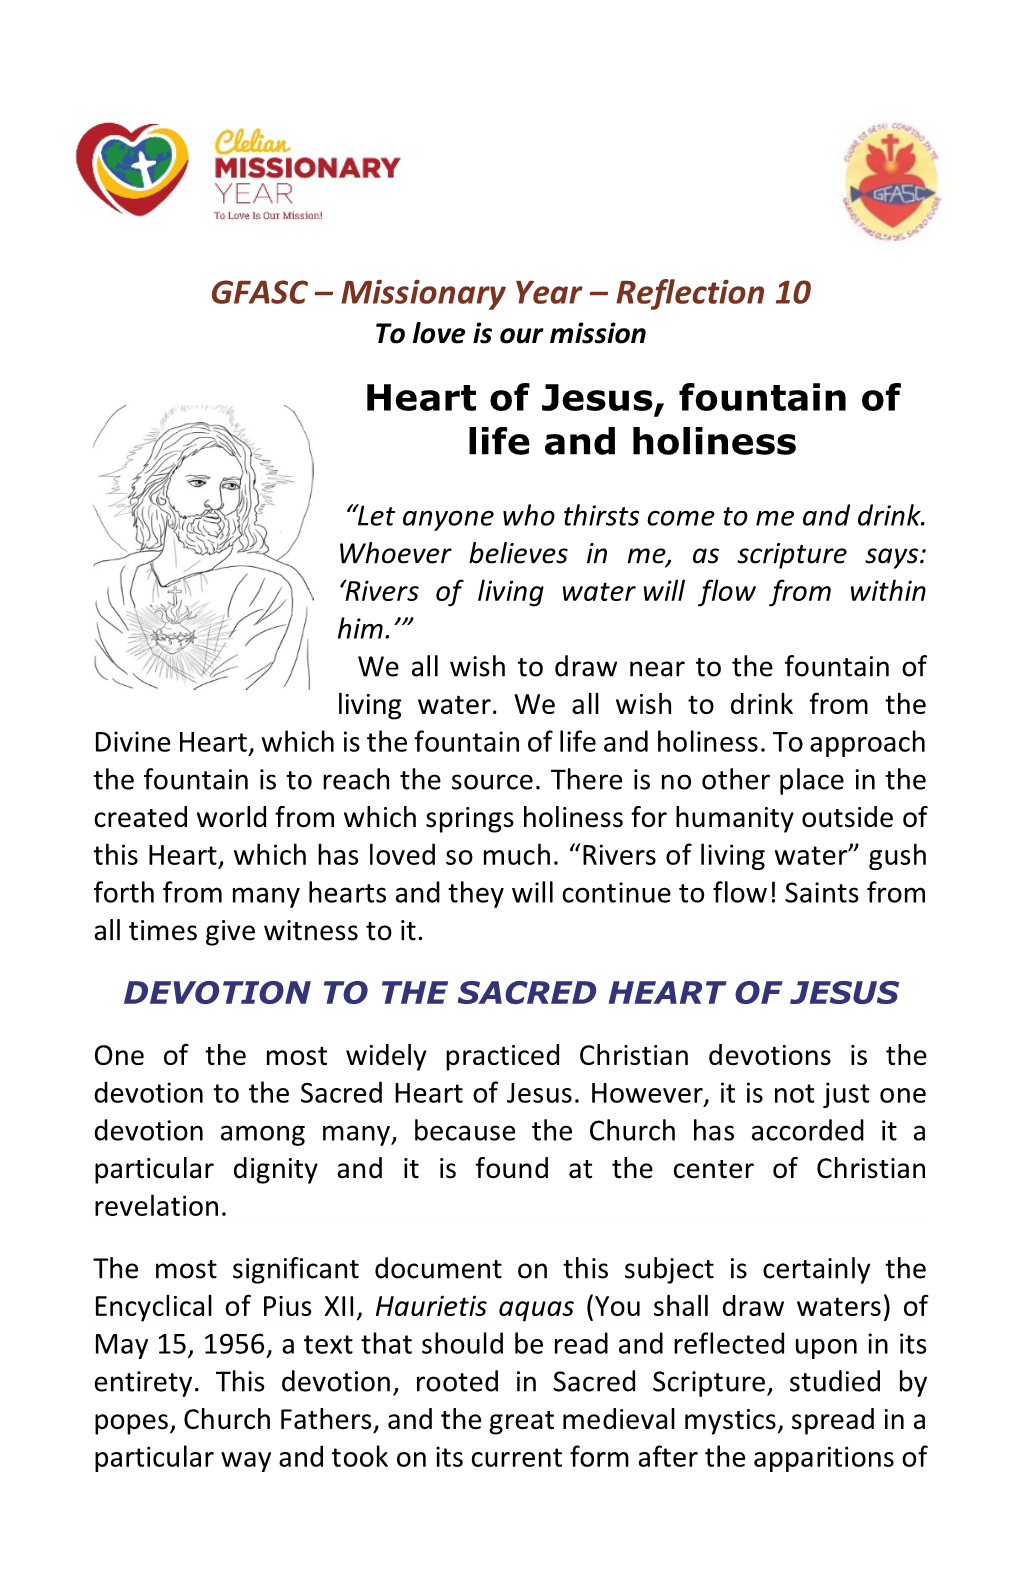 Reflection 10 Heart of Jesus, Fountain of Life and Holiness